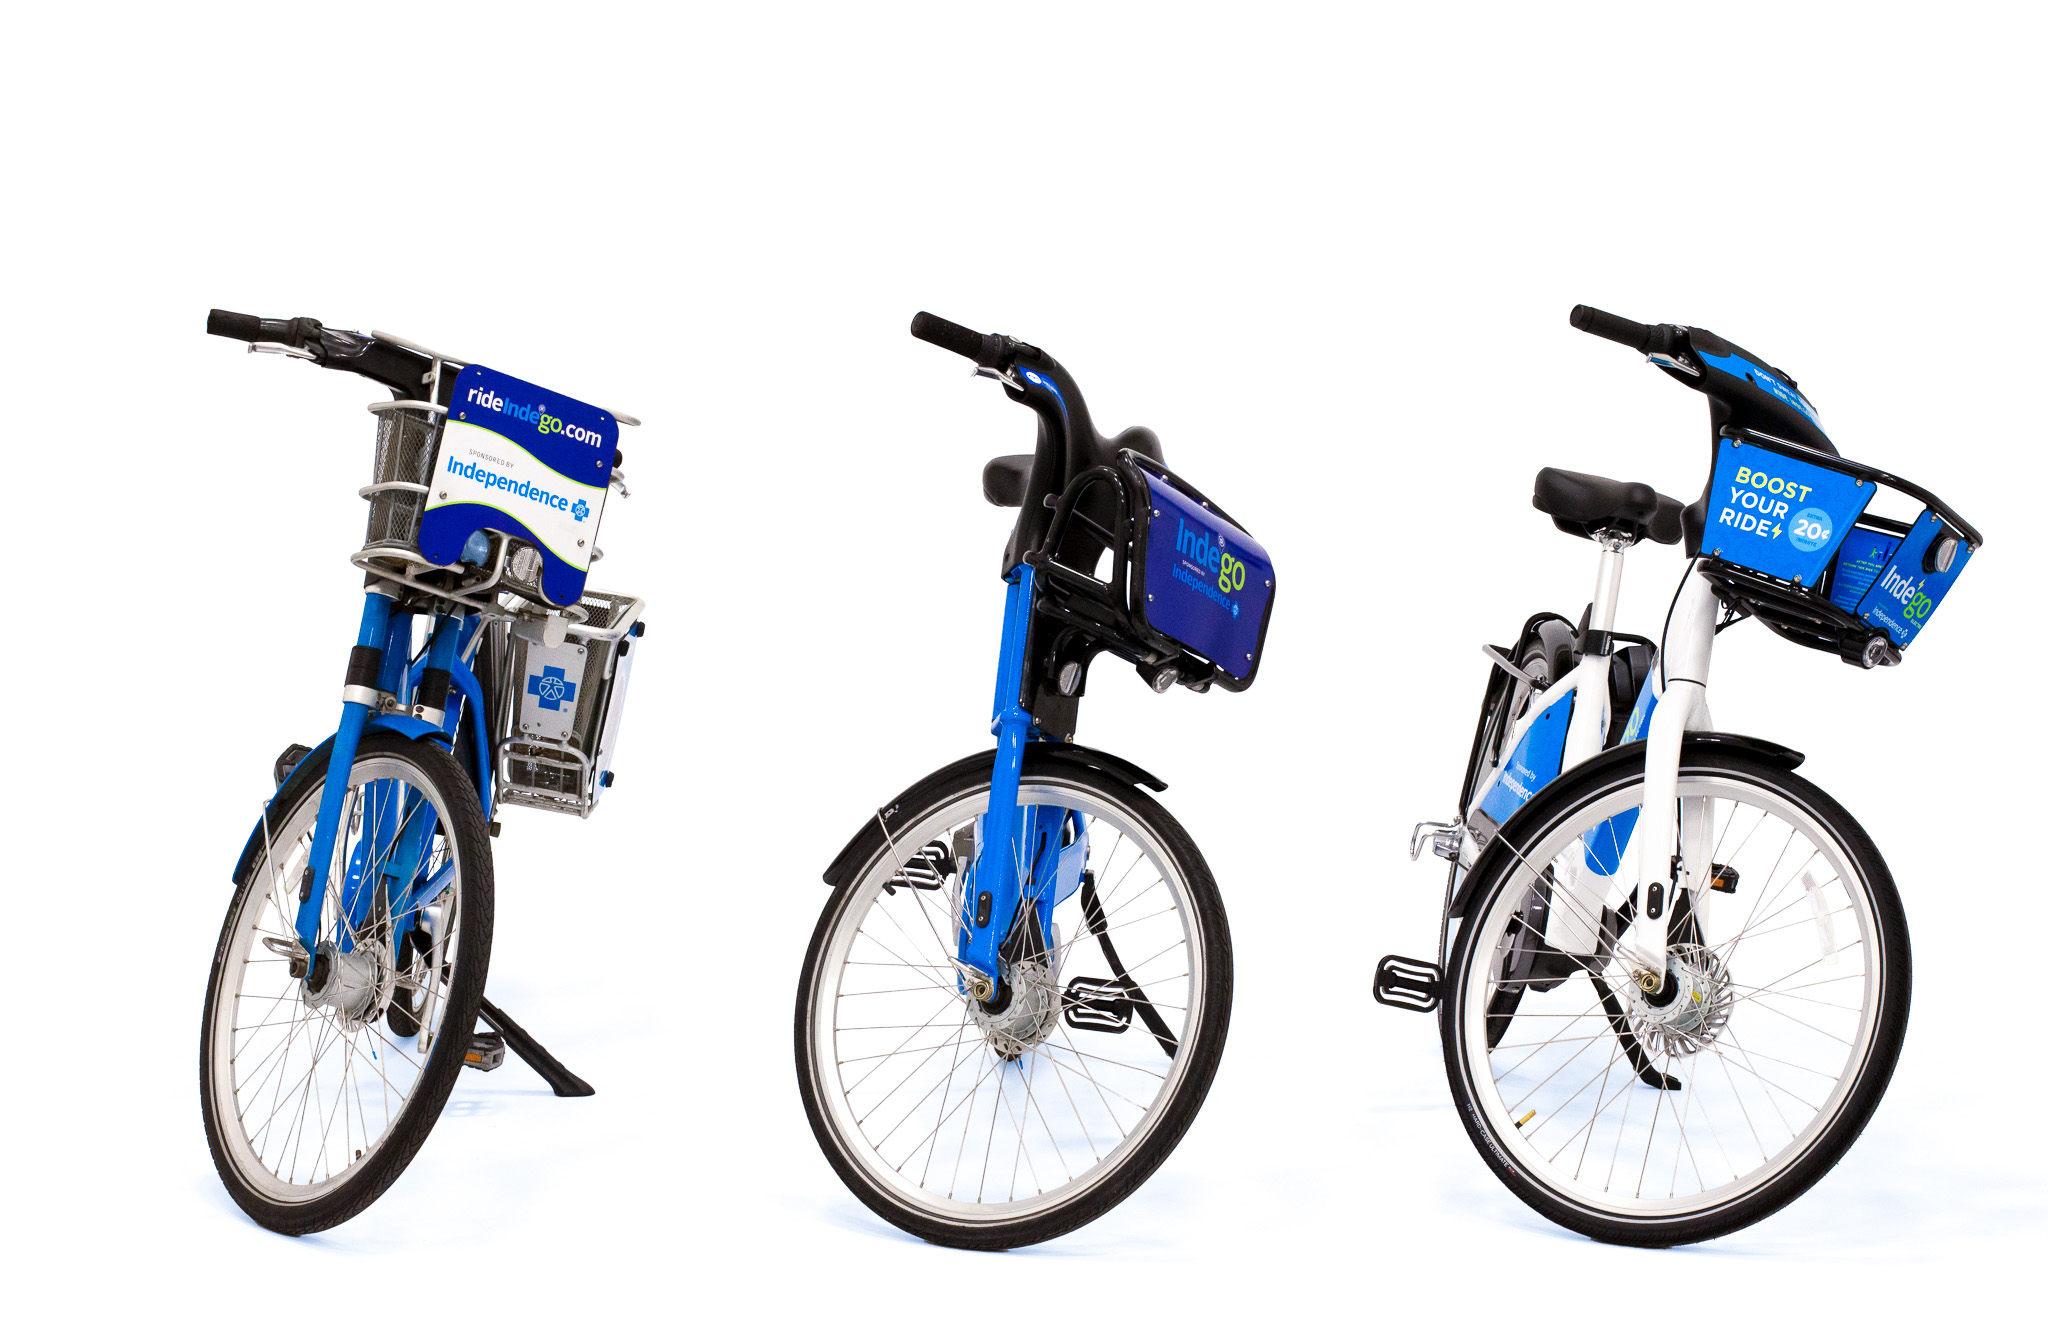 From left to right: Indego Classic 1.0, Indego Classic 2.0, and White Indego Electric